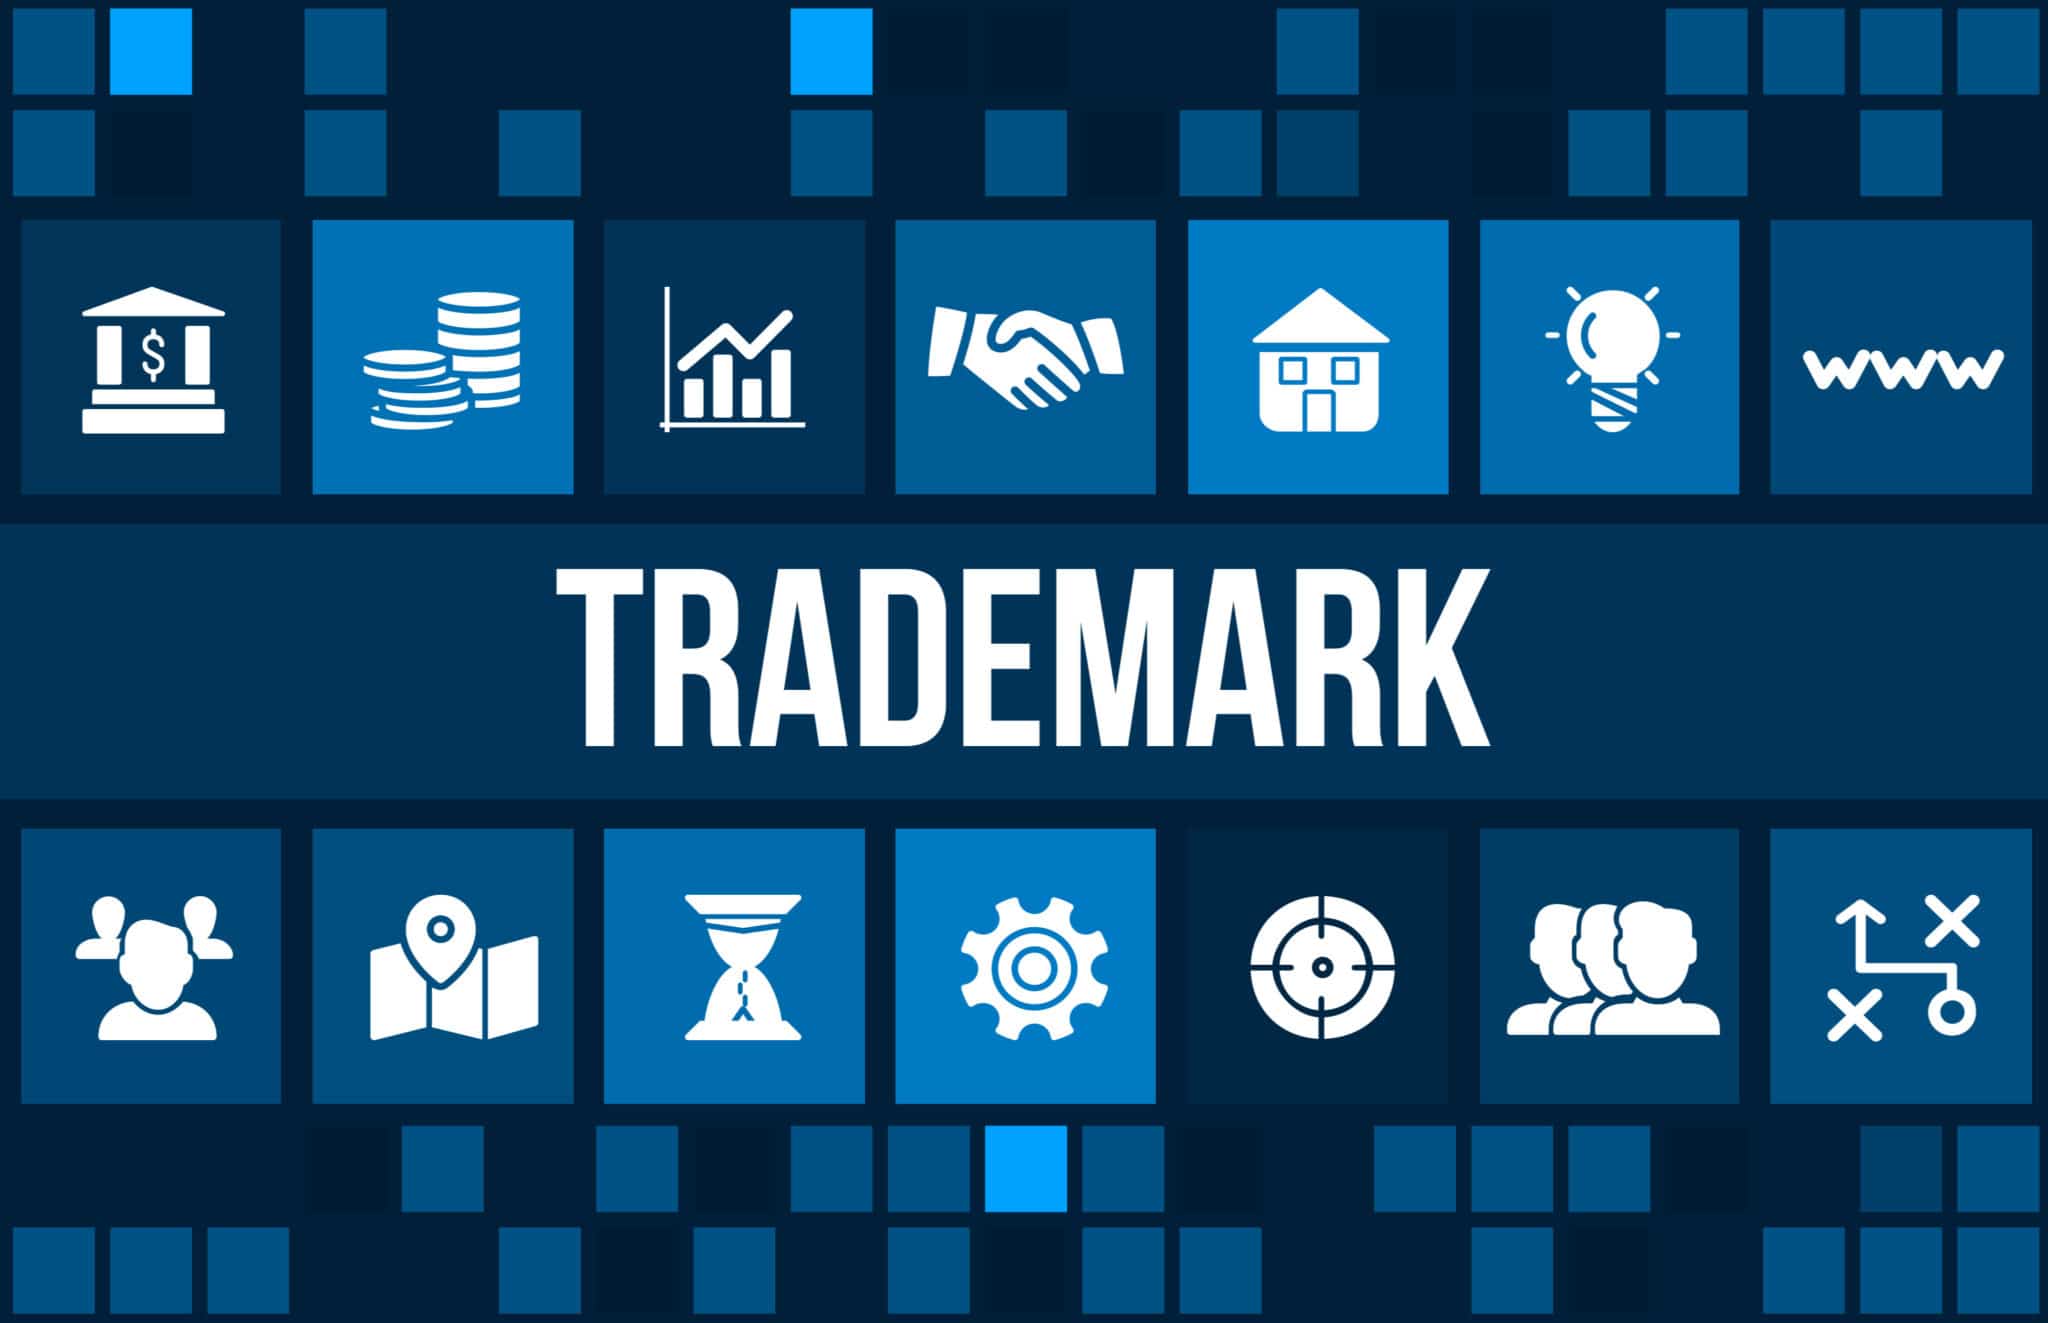 Trademark concept image with business icons and copyspace.